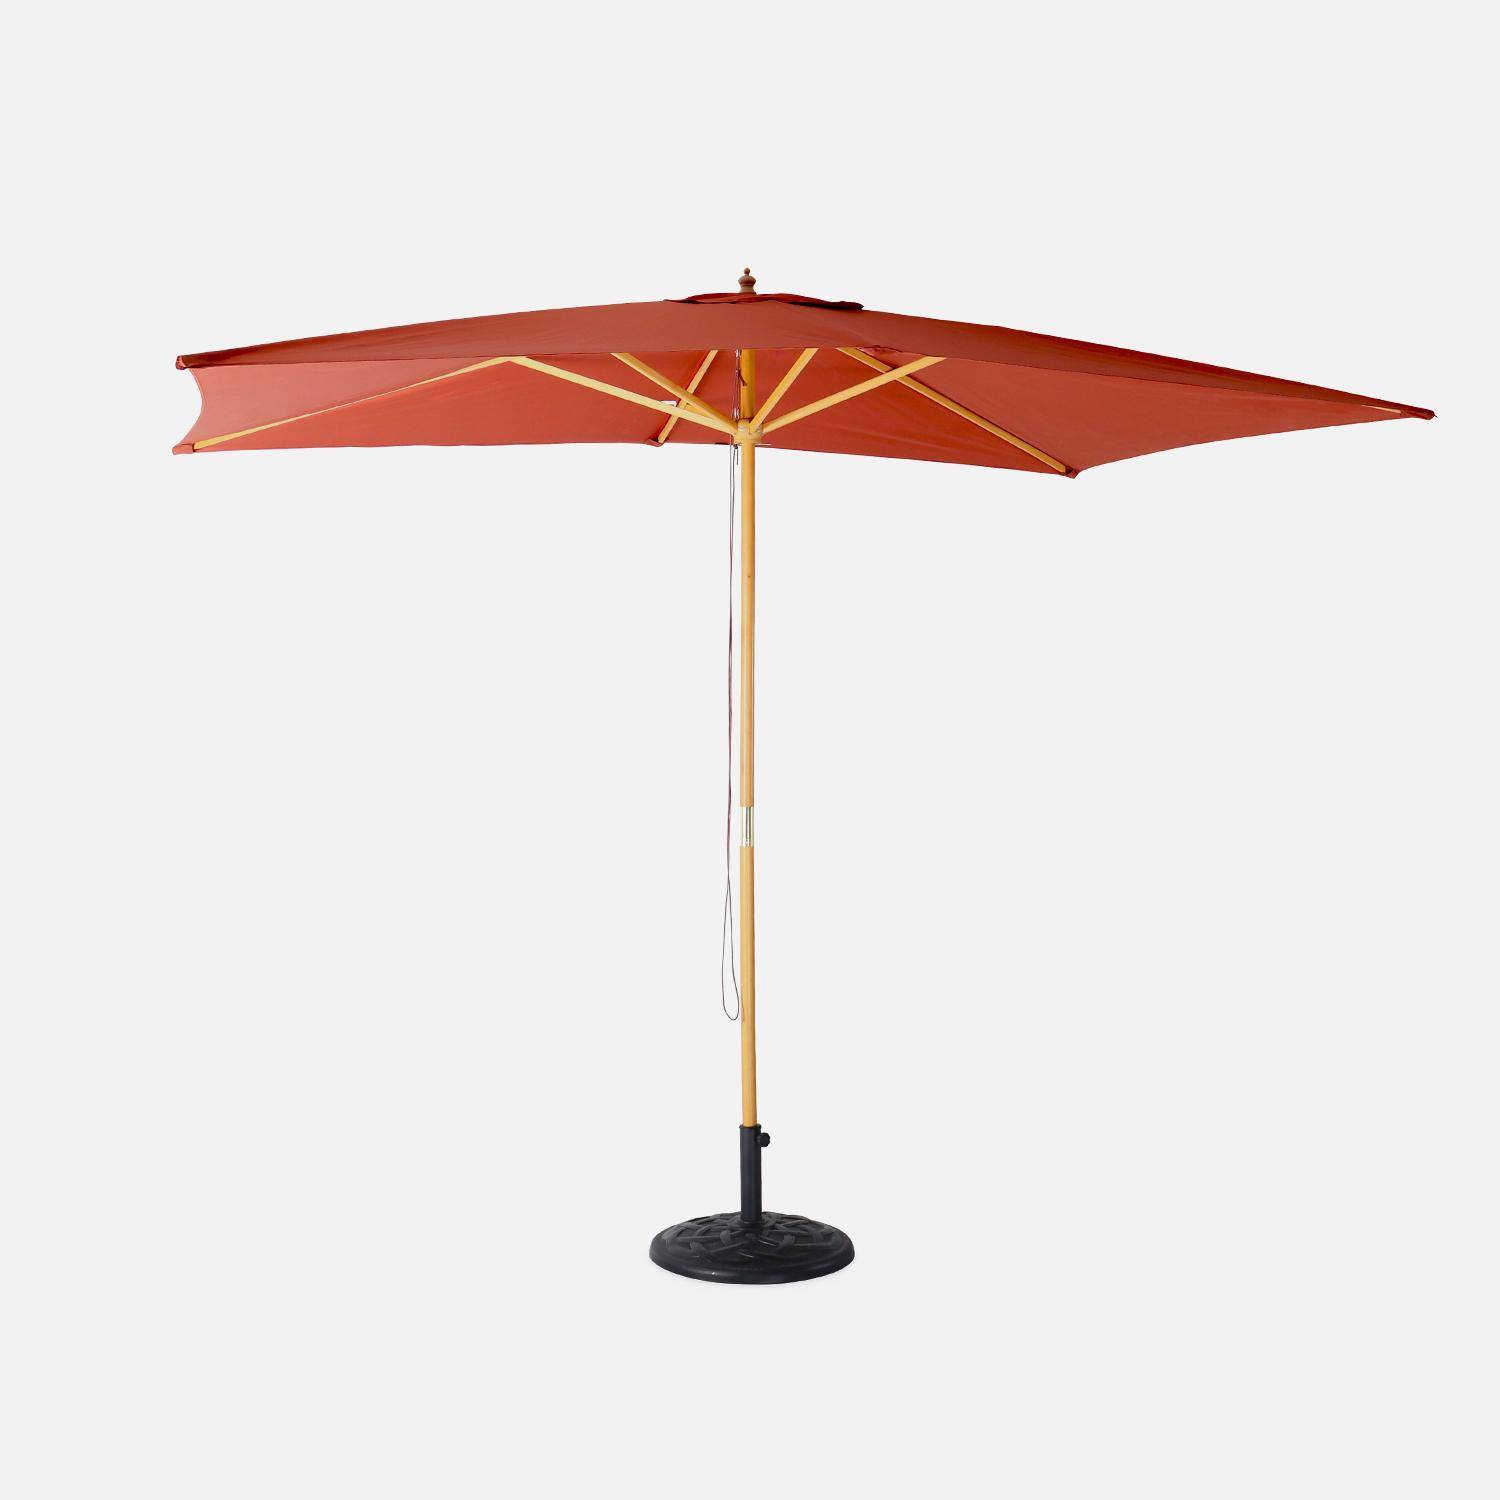 Straight rectangular wooden parasol 2x3m - adjustable central mast in wood and hand pulley opening - Cabourg - Terracotta Photo1